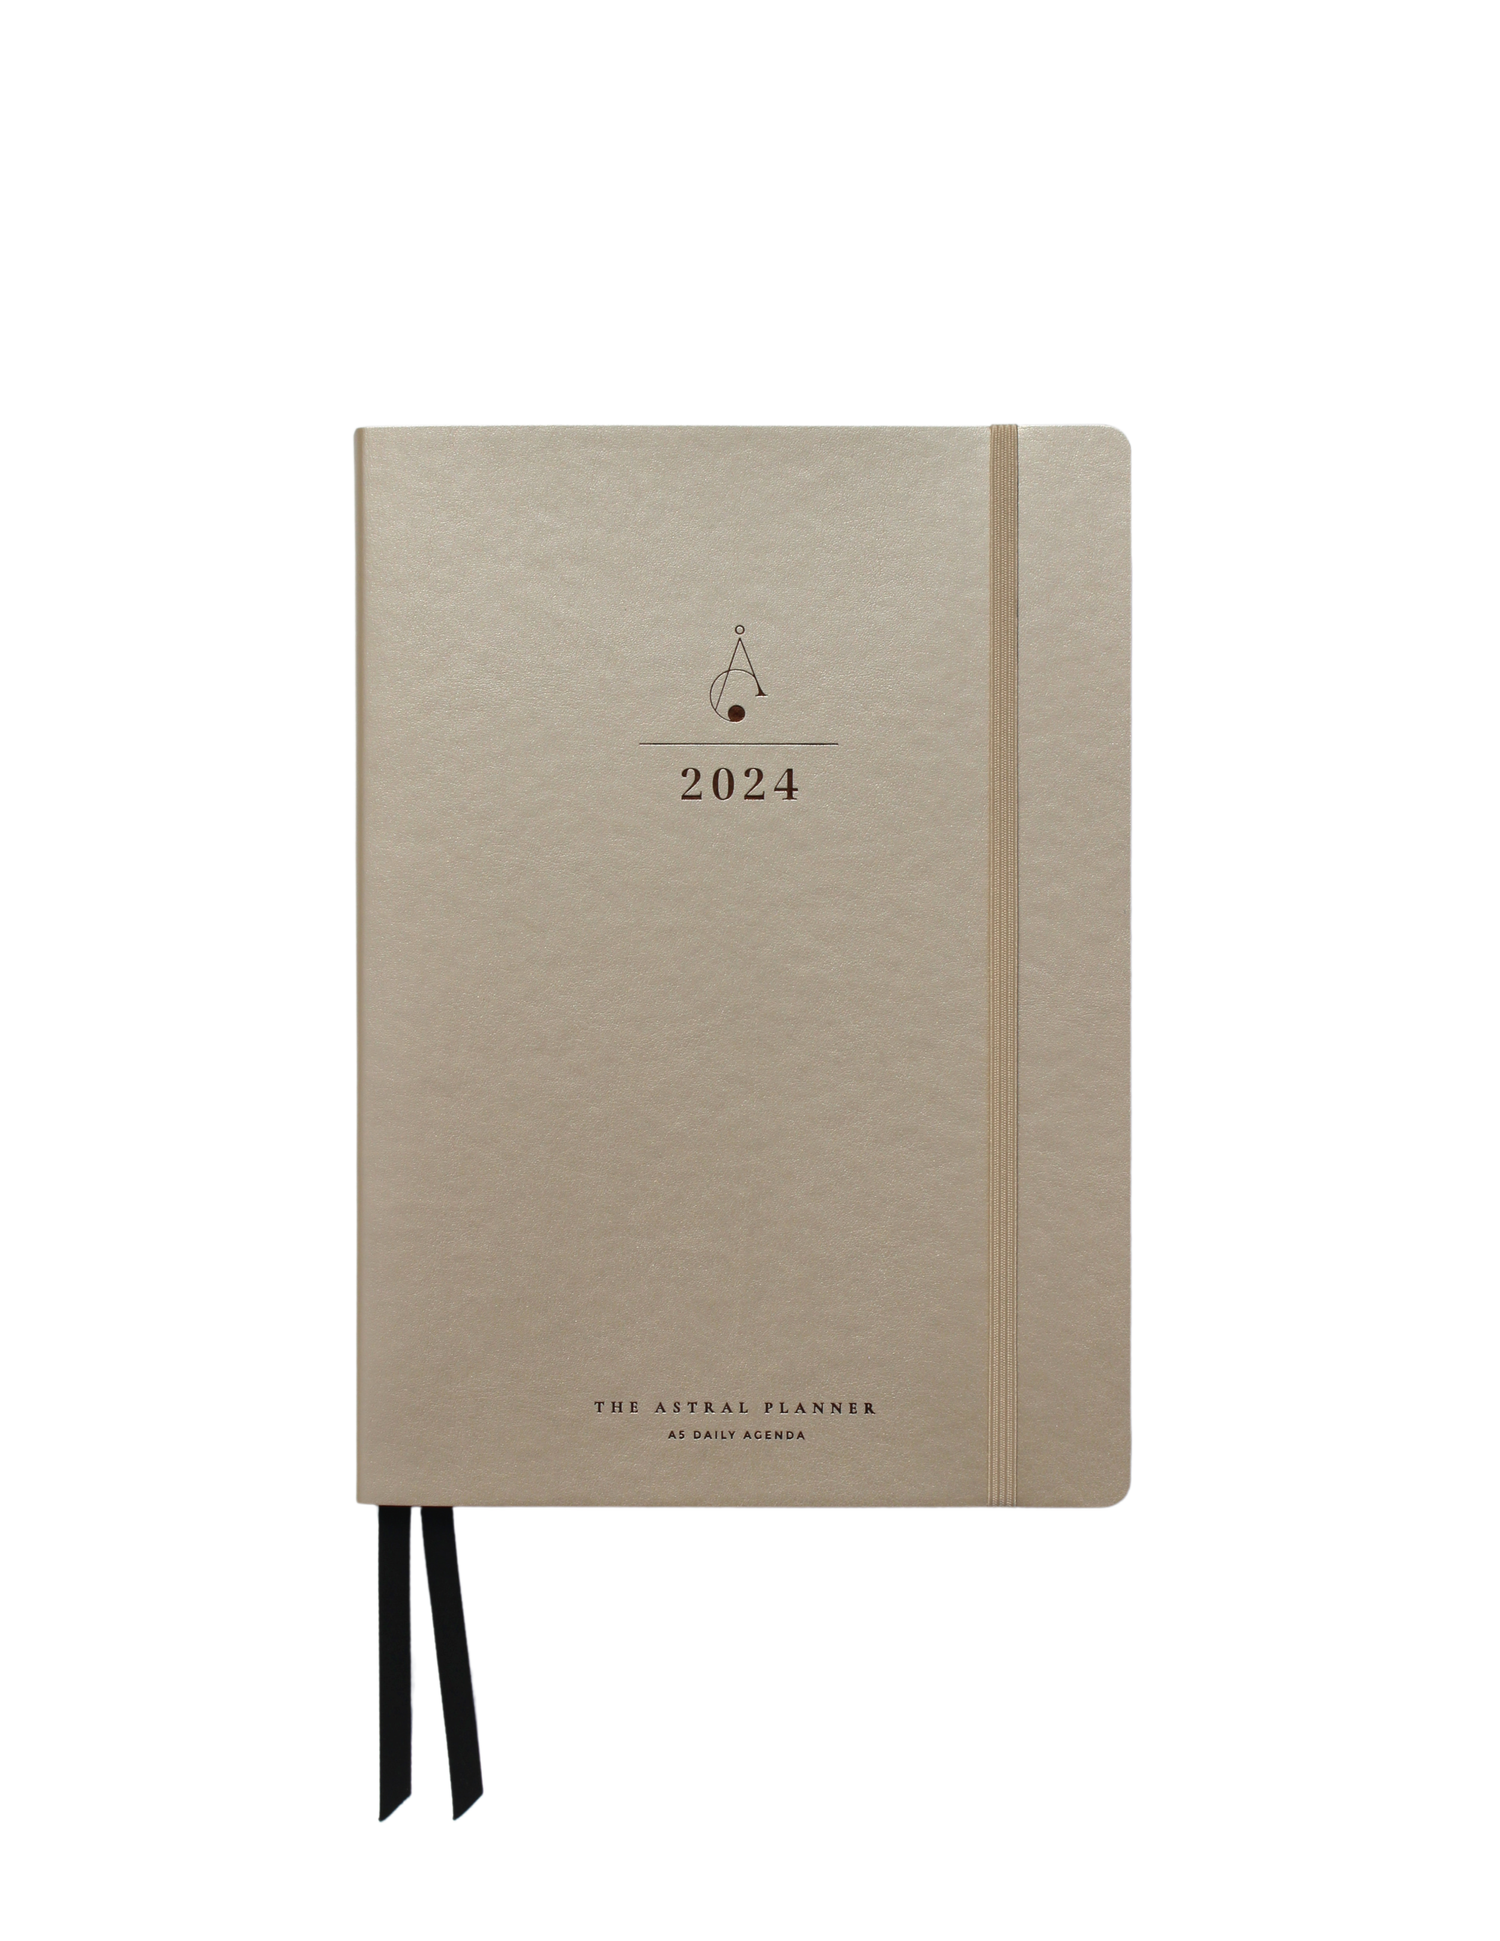 A5 Binder Organizer - Agenda 2024 Daily, Weekly & Monthly Management Undated to Do List & Unisex Business Planner - PU Leather Journal - Goal